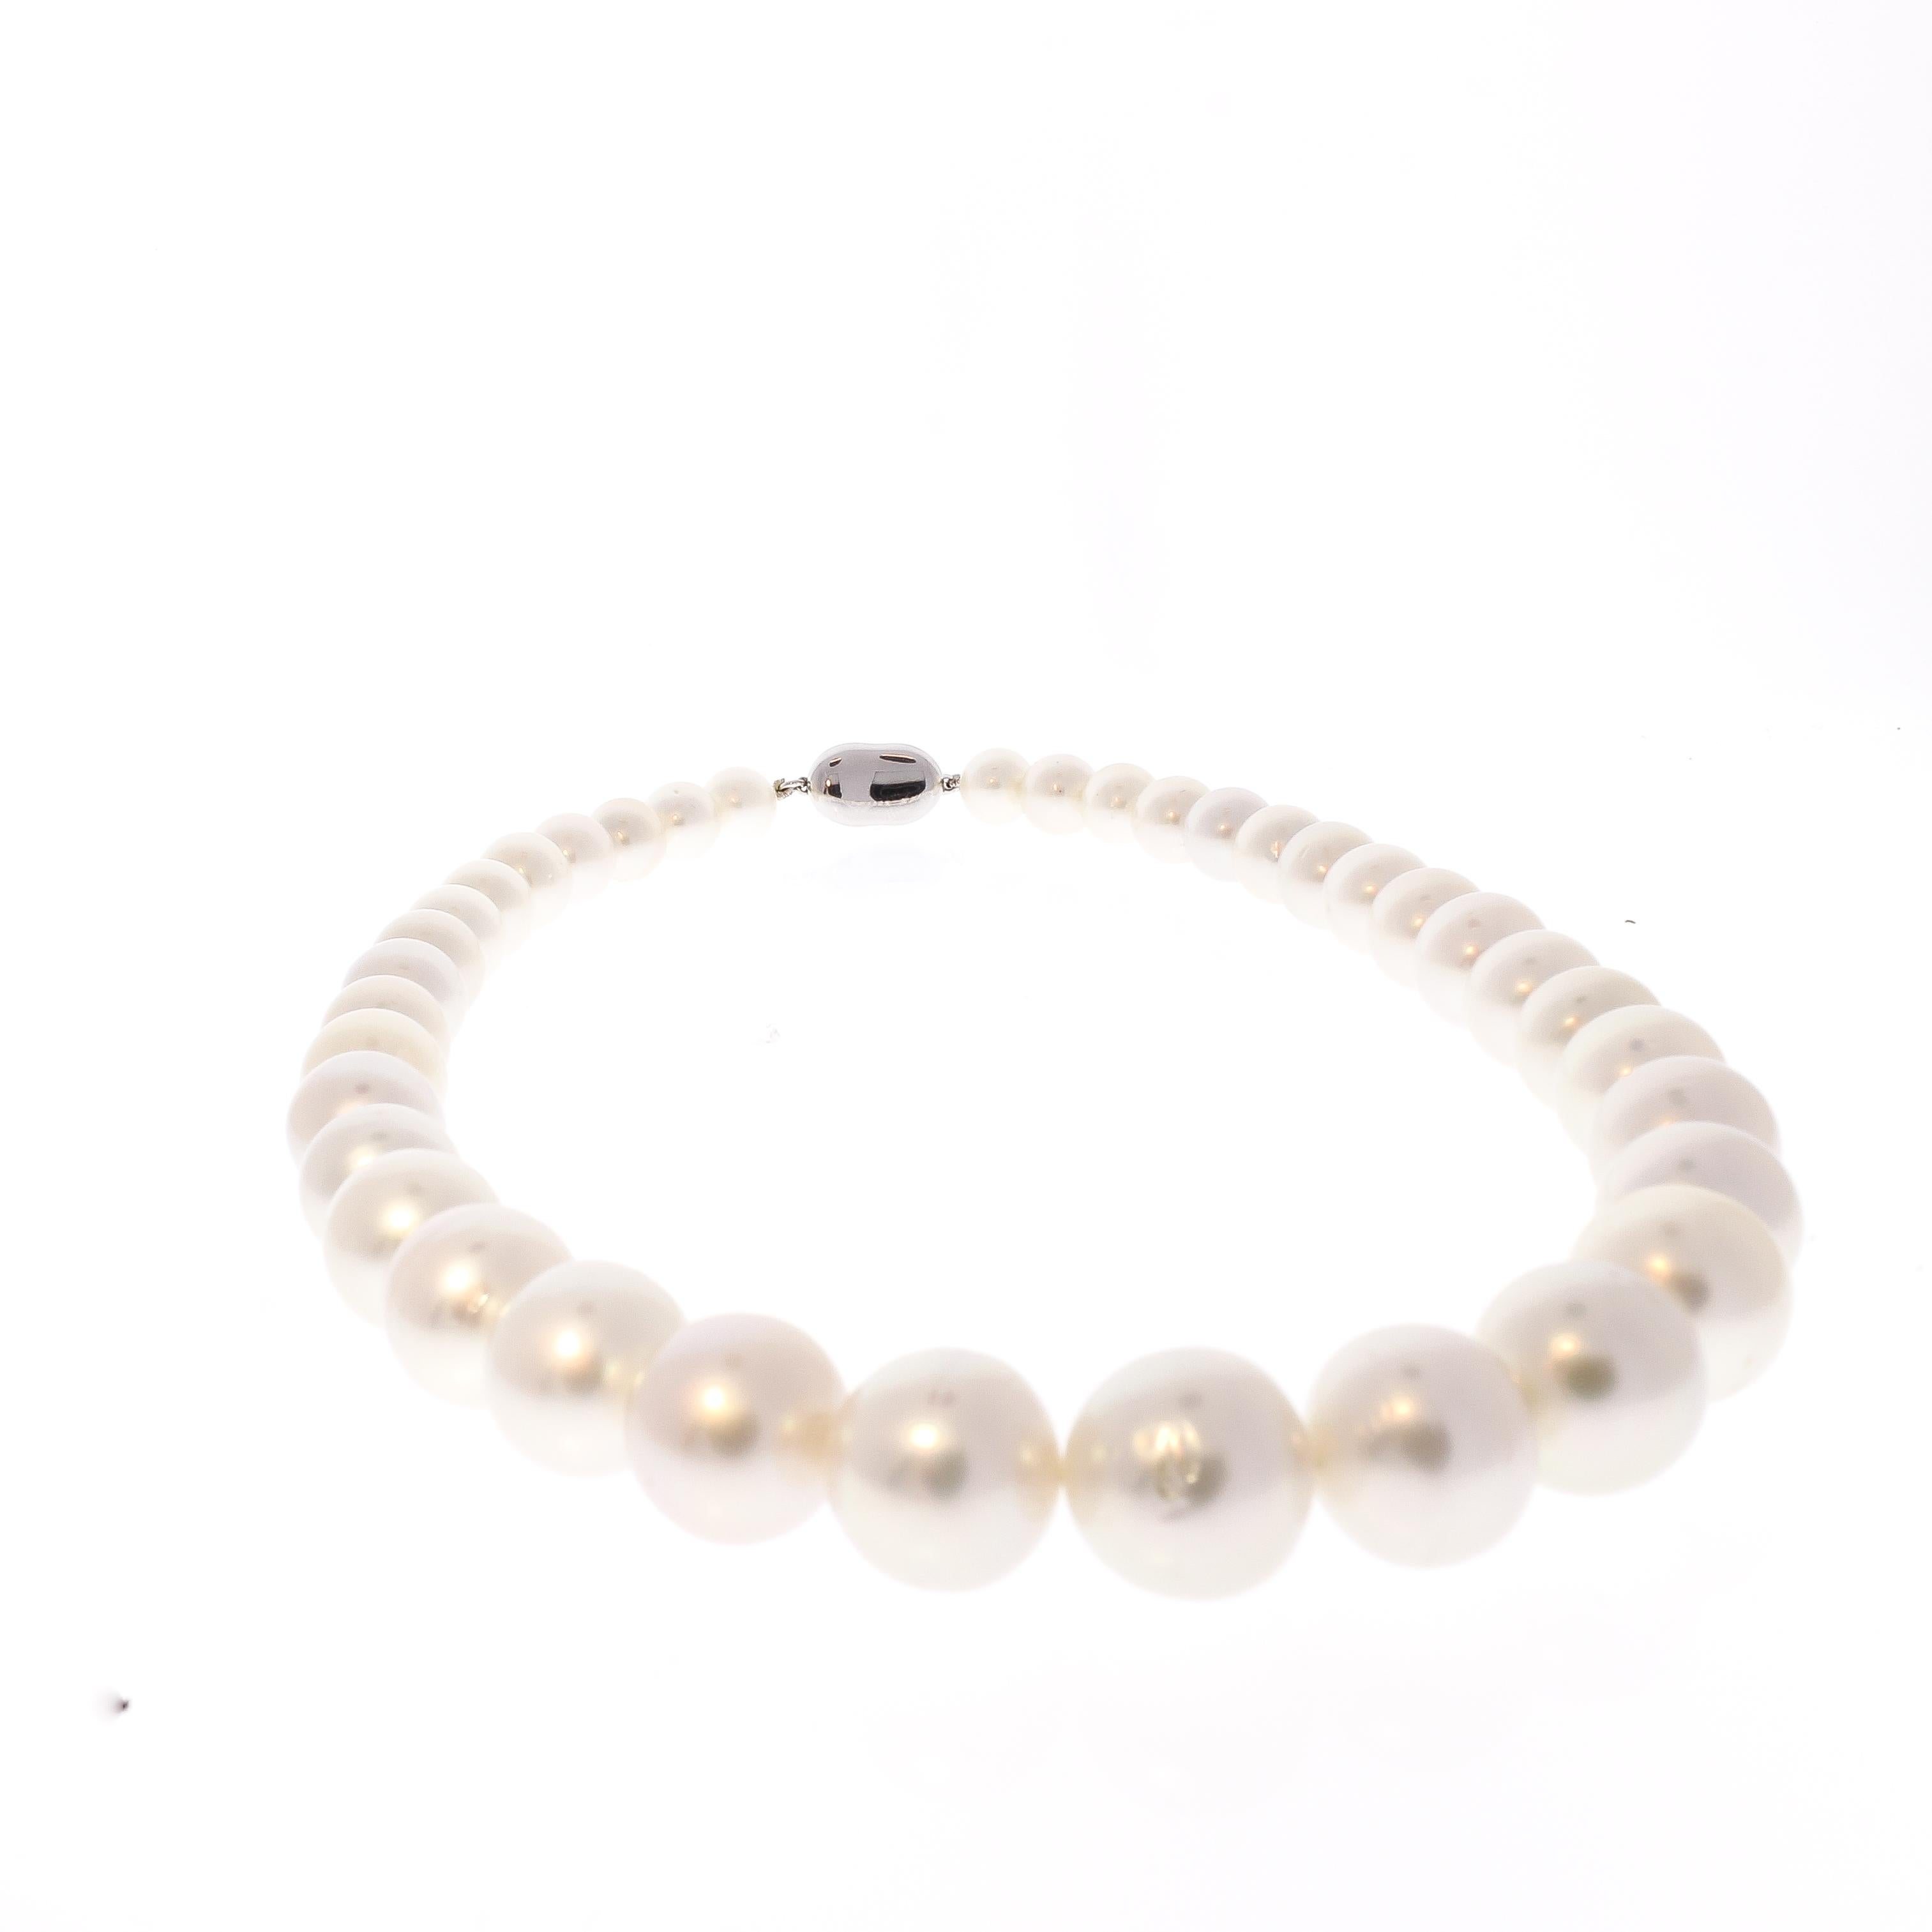 Graduated South Sea White Pearl Necklace 1